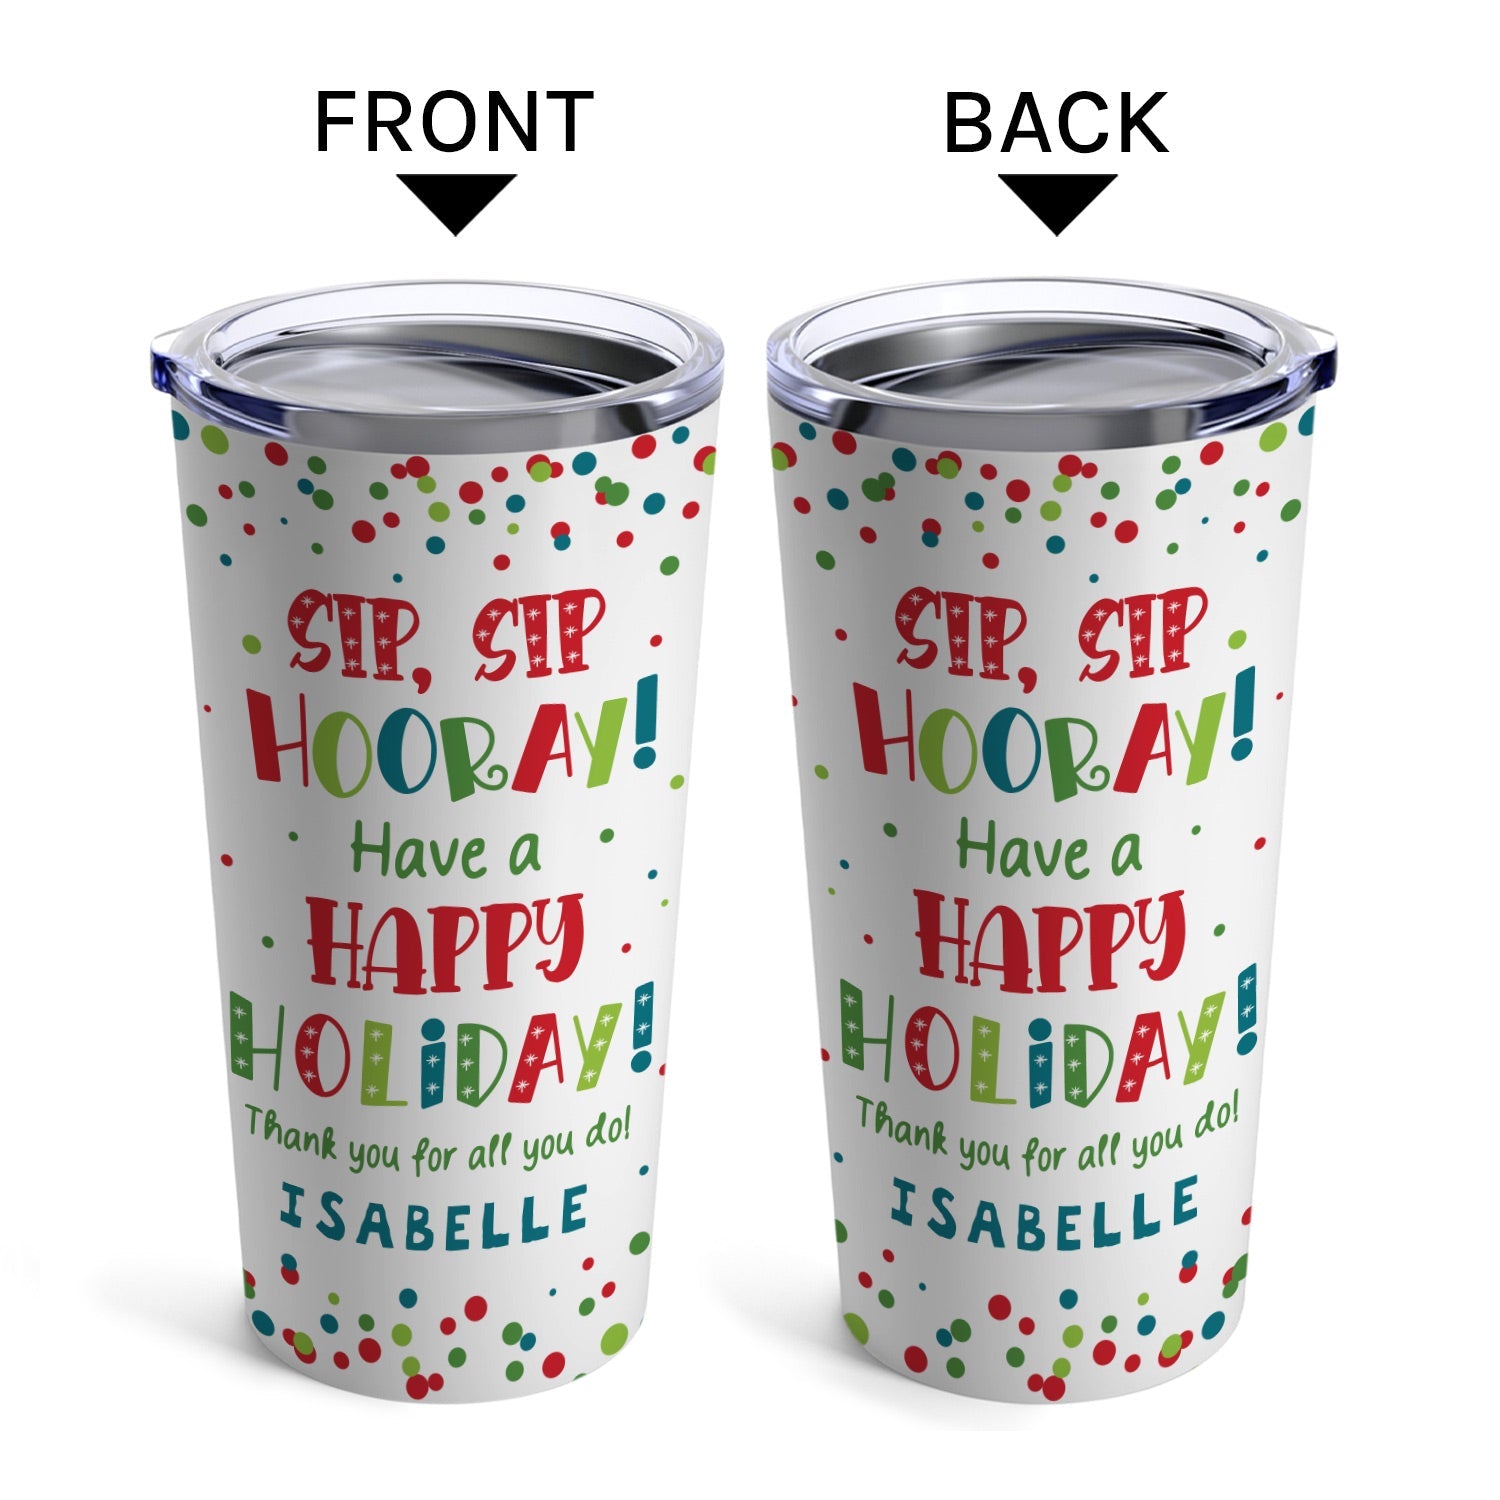 Sip, Sip Hooray. Have A Happy Holiday. - Personalized Christmas gift For Coworker or Employee - Custom Tumbler - MyMindfulGifts